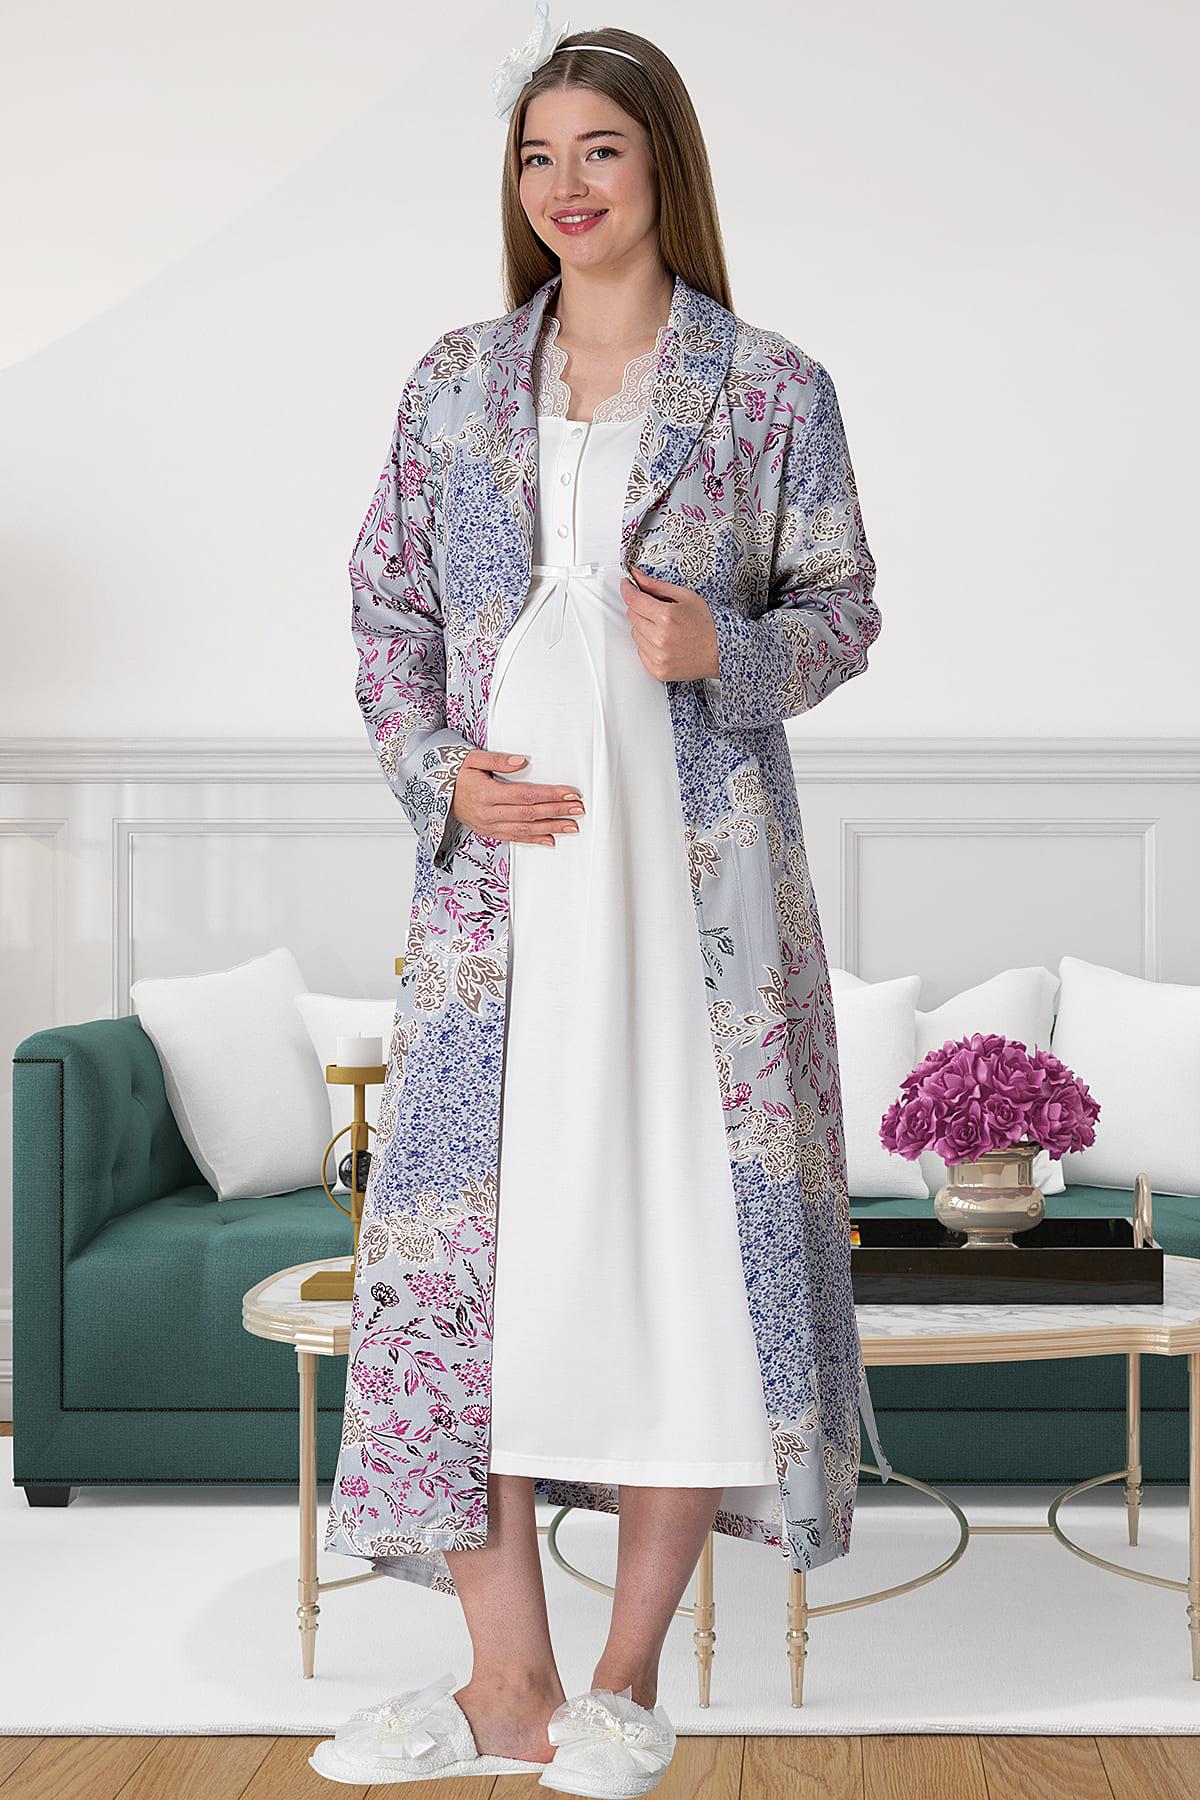 Shopymommy 5807 Lace Collar Maternity & Nursing Nightgown With Patterned Robe Grey